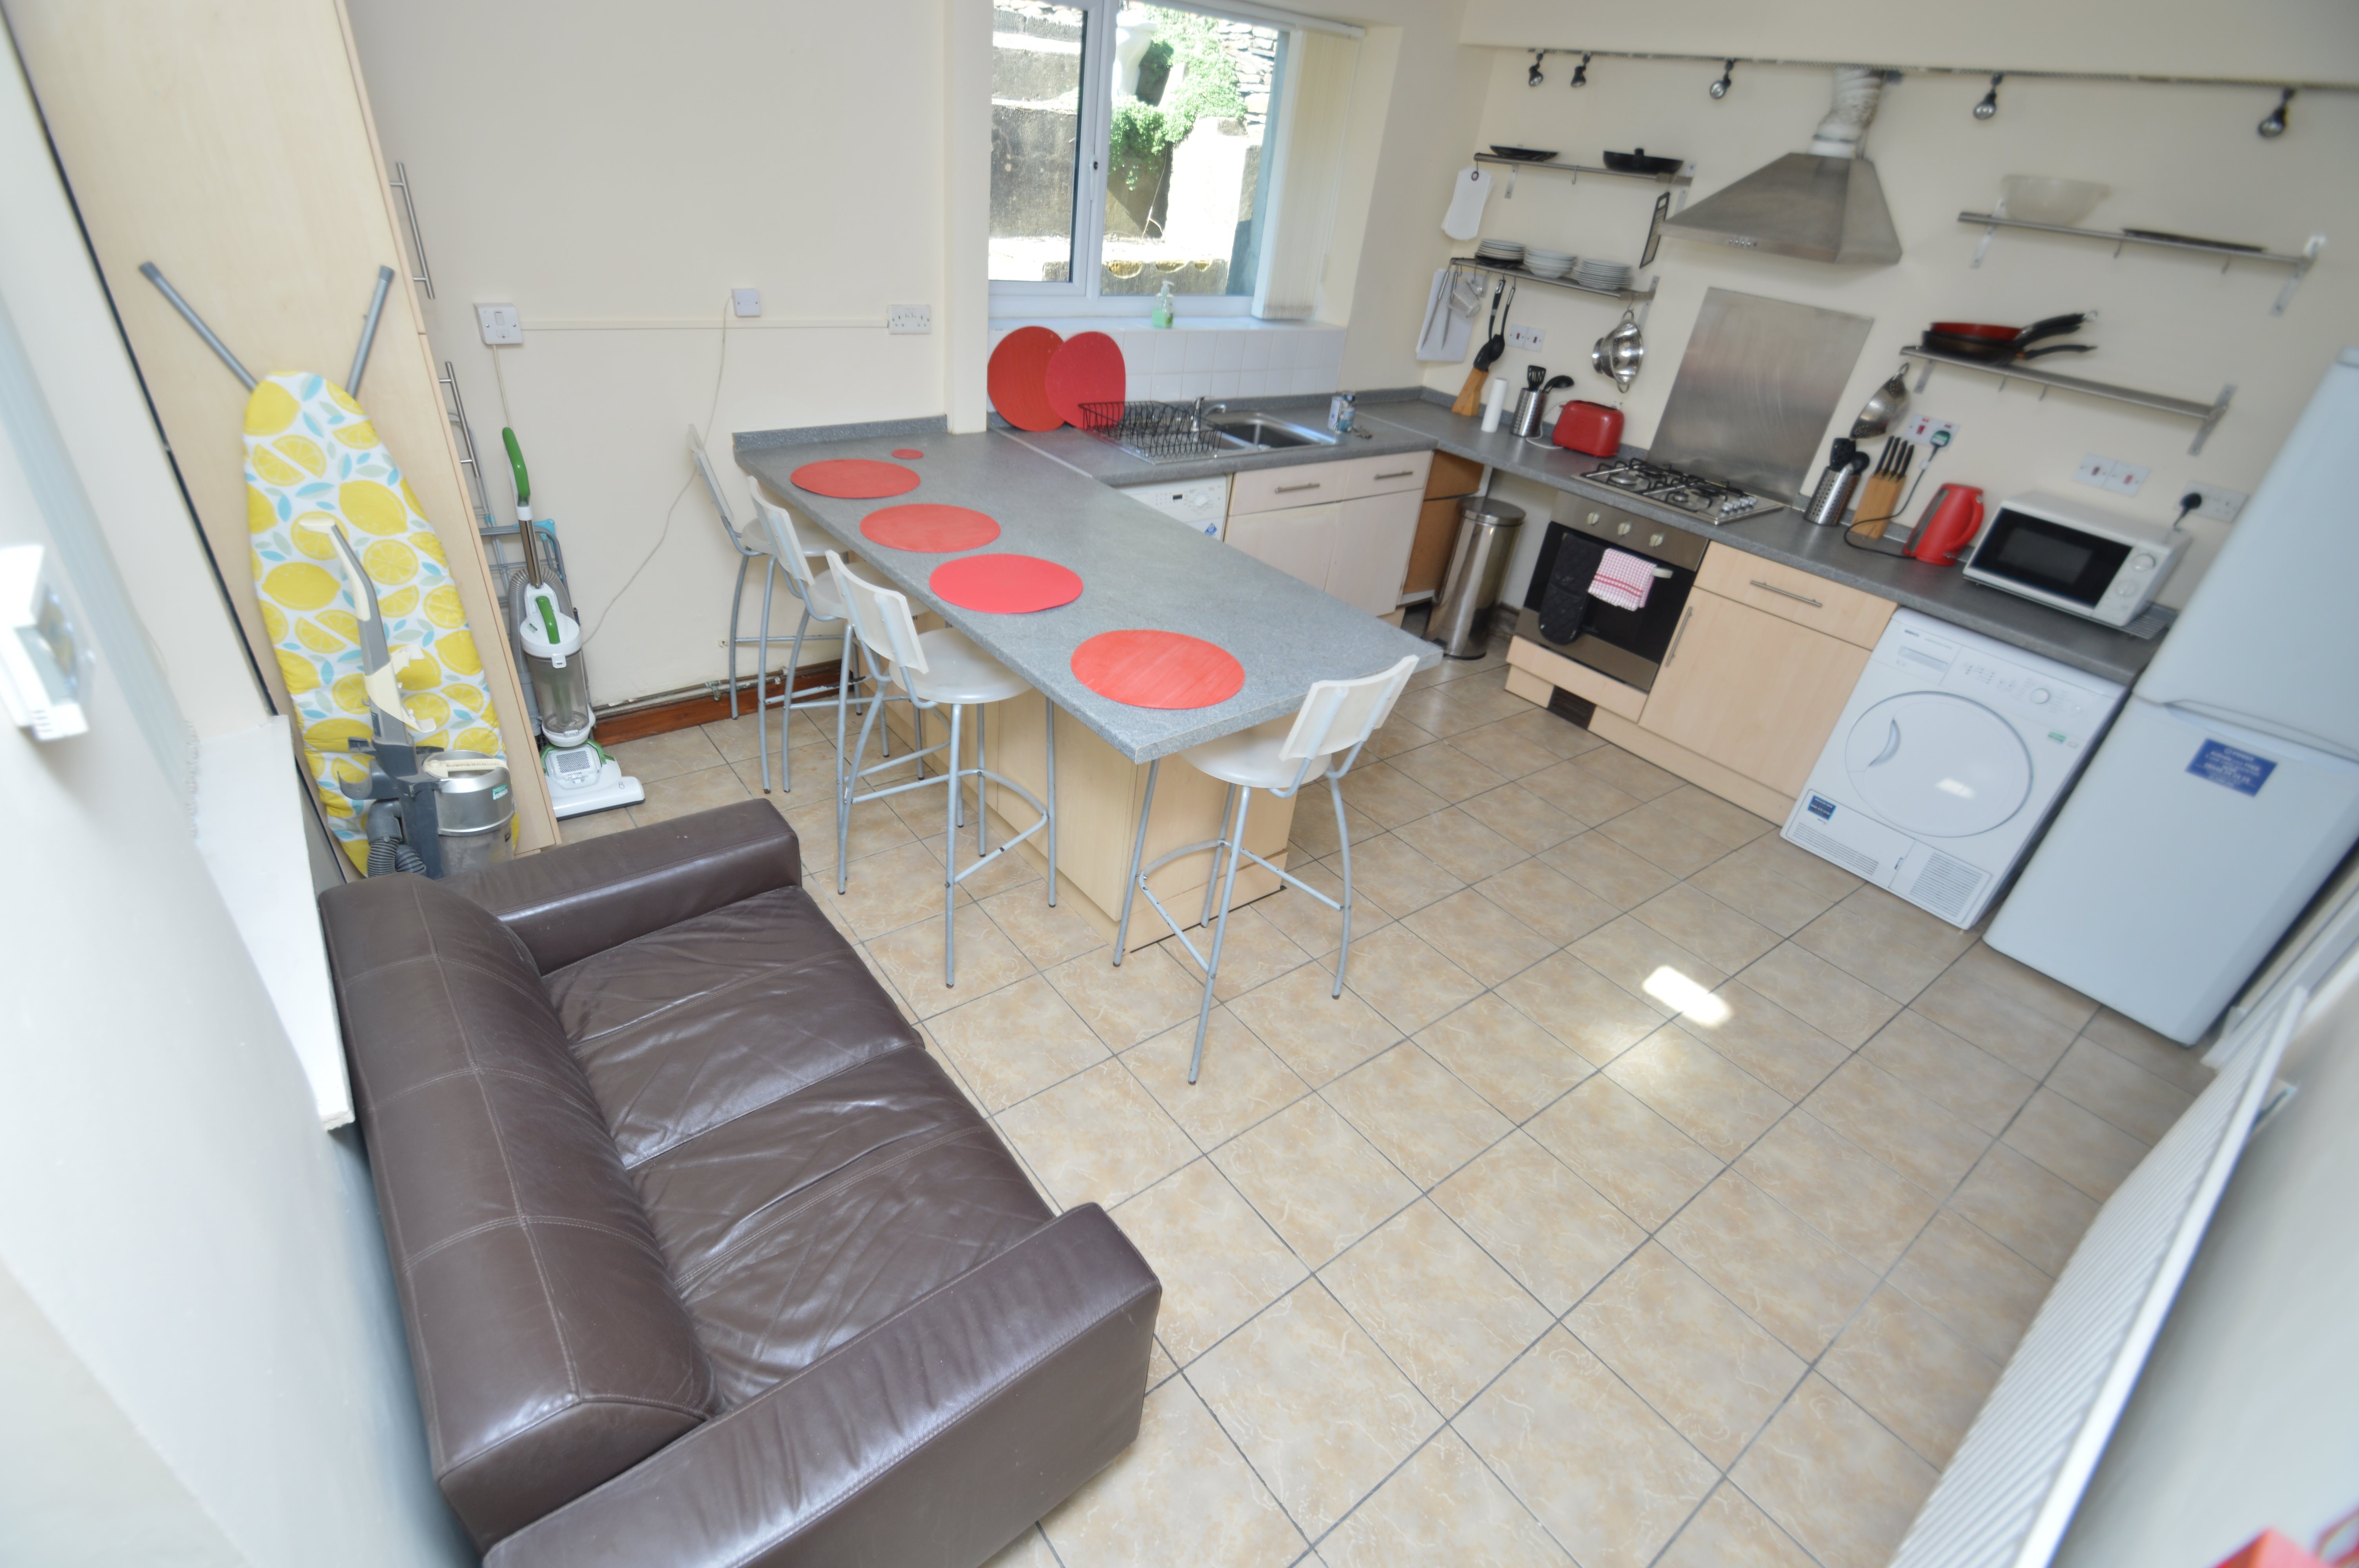 1 bed house / flat share to rent in Wood Road , Treforest   - Property Image 4